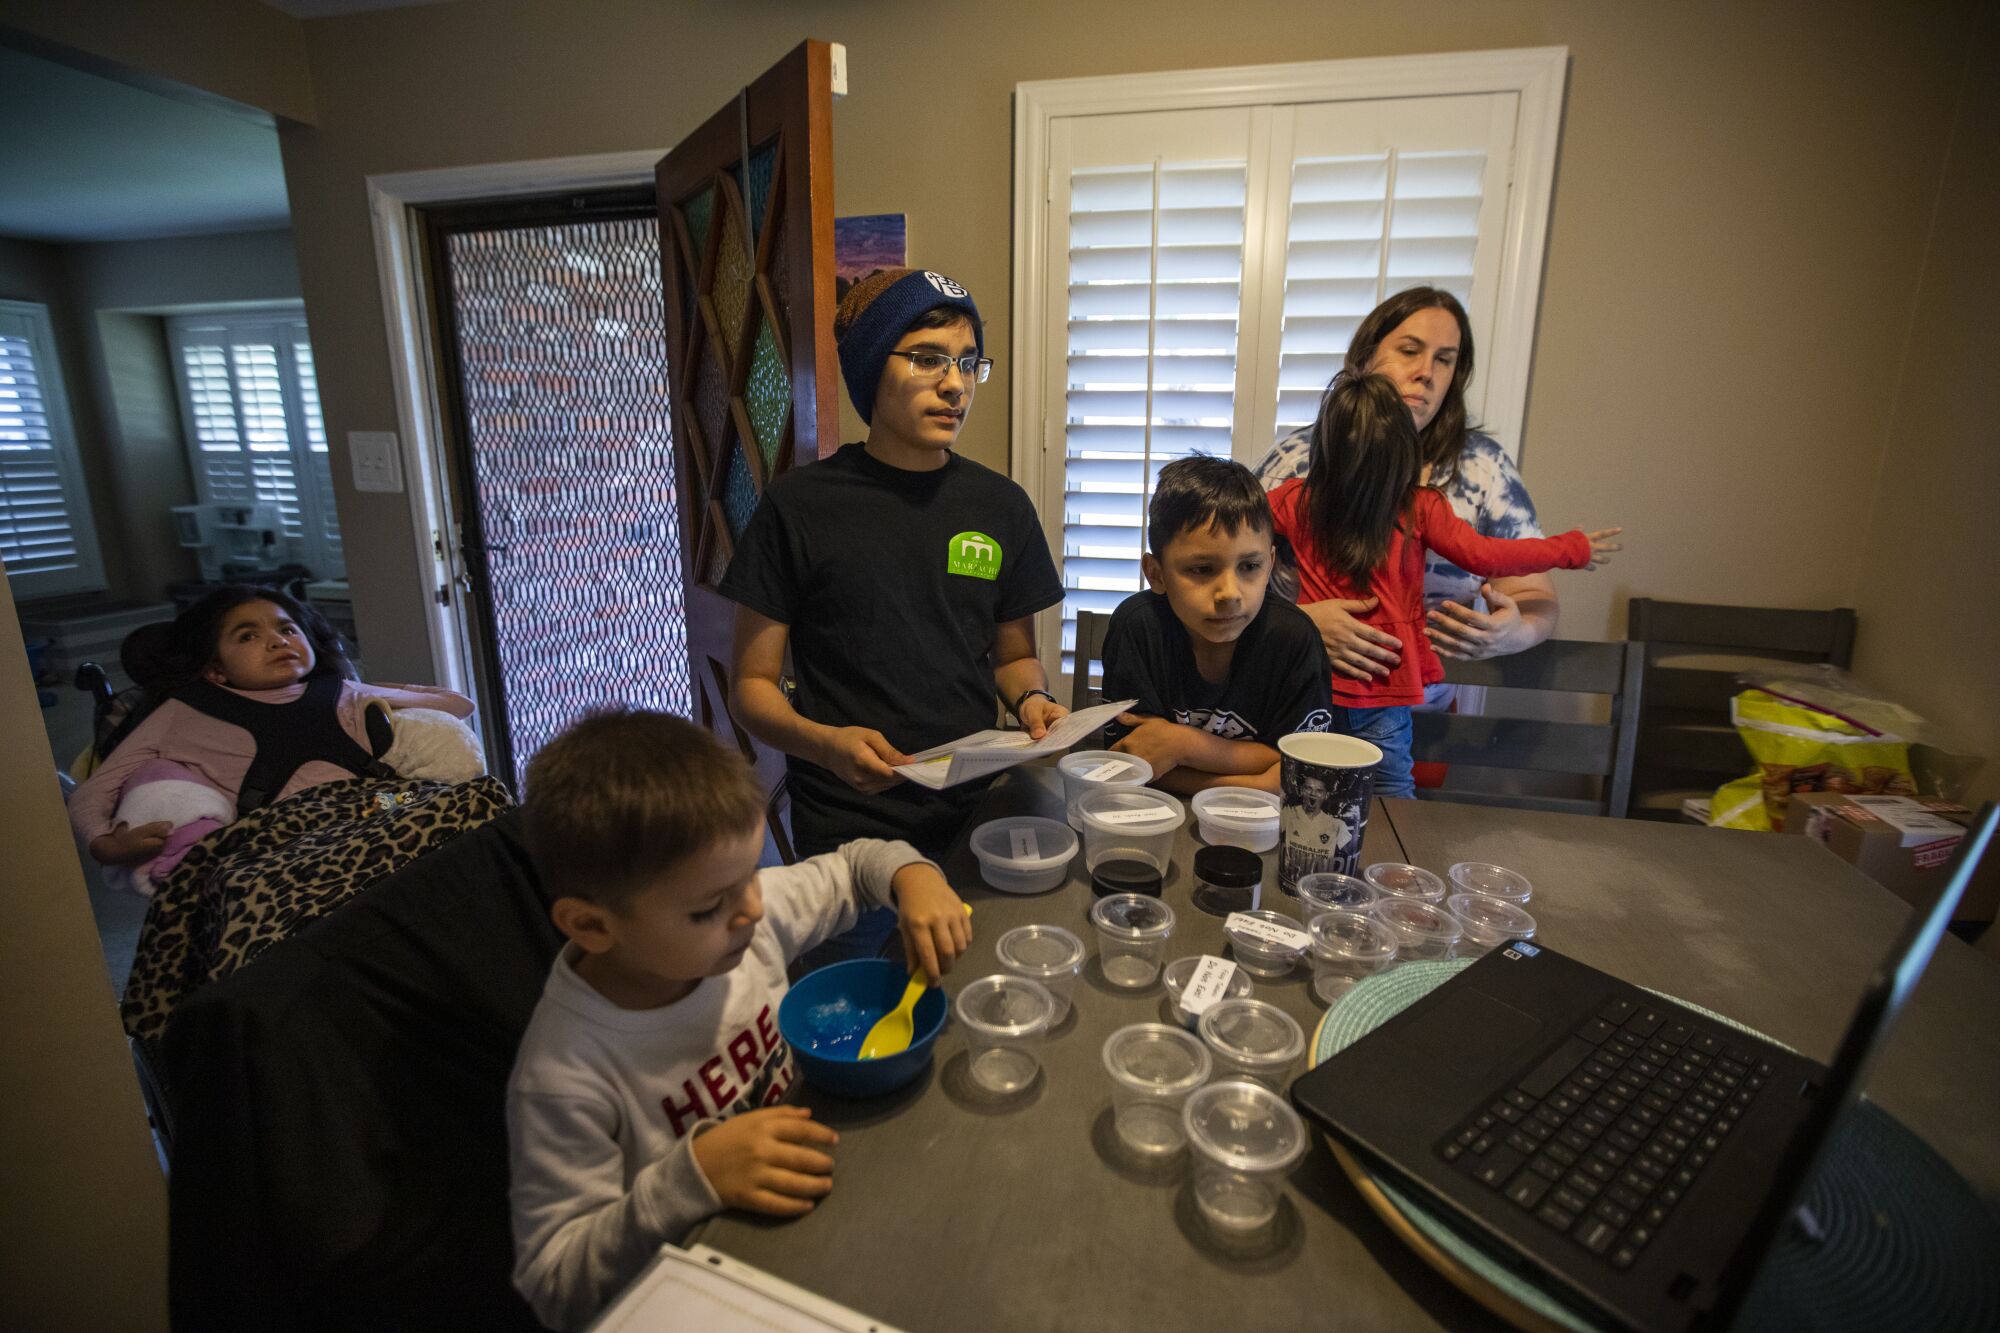 Hannah Lopez, far left, sits quietly as her siblings and mother participate in a Zoom science experiment.